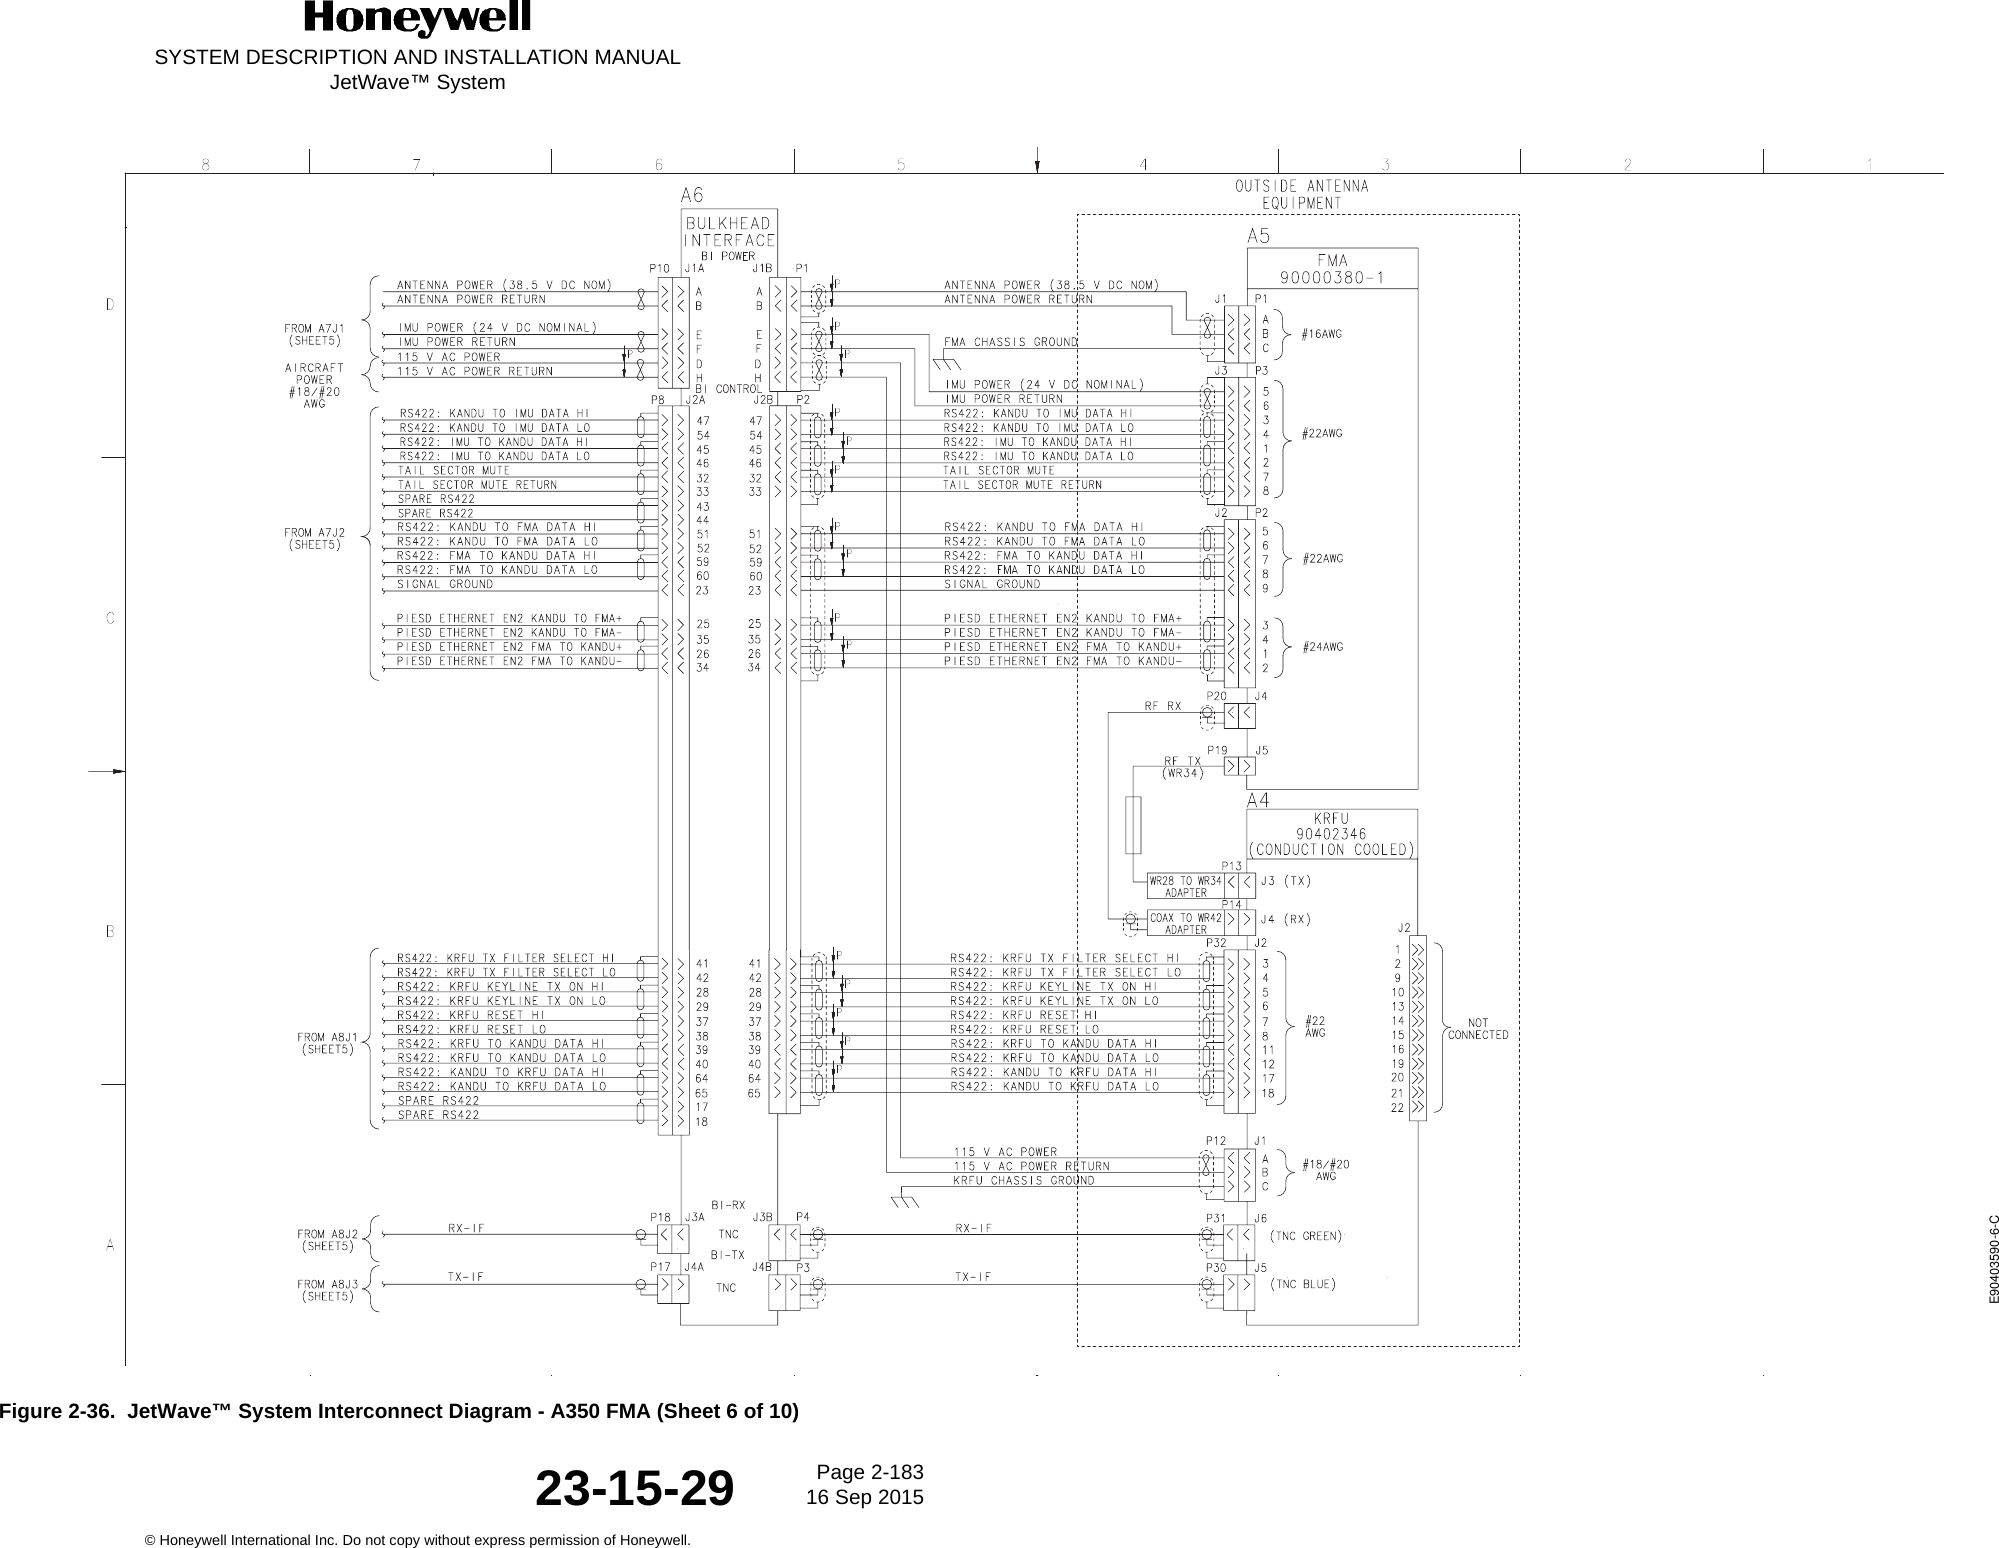 SYSTEM DESCRIPTION AND INSTALLATION MANUALJetWave™ SystemPage 2-183 16 Sep 2015© Honeywell International Inc. Do not copy without express permission of Honeywell.23-15-29Figure 2-36.  JetWave™ System Interconnect Diagram - A350 FMA (Sheet 6 of 10)E90403590-6-C